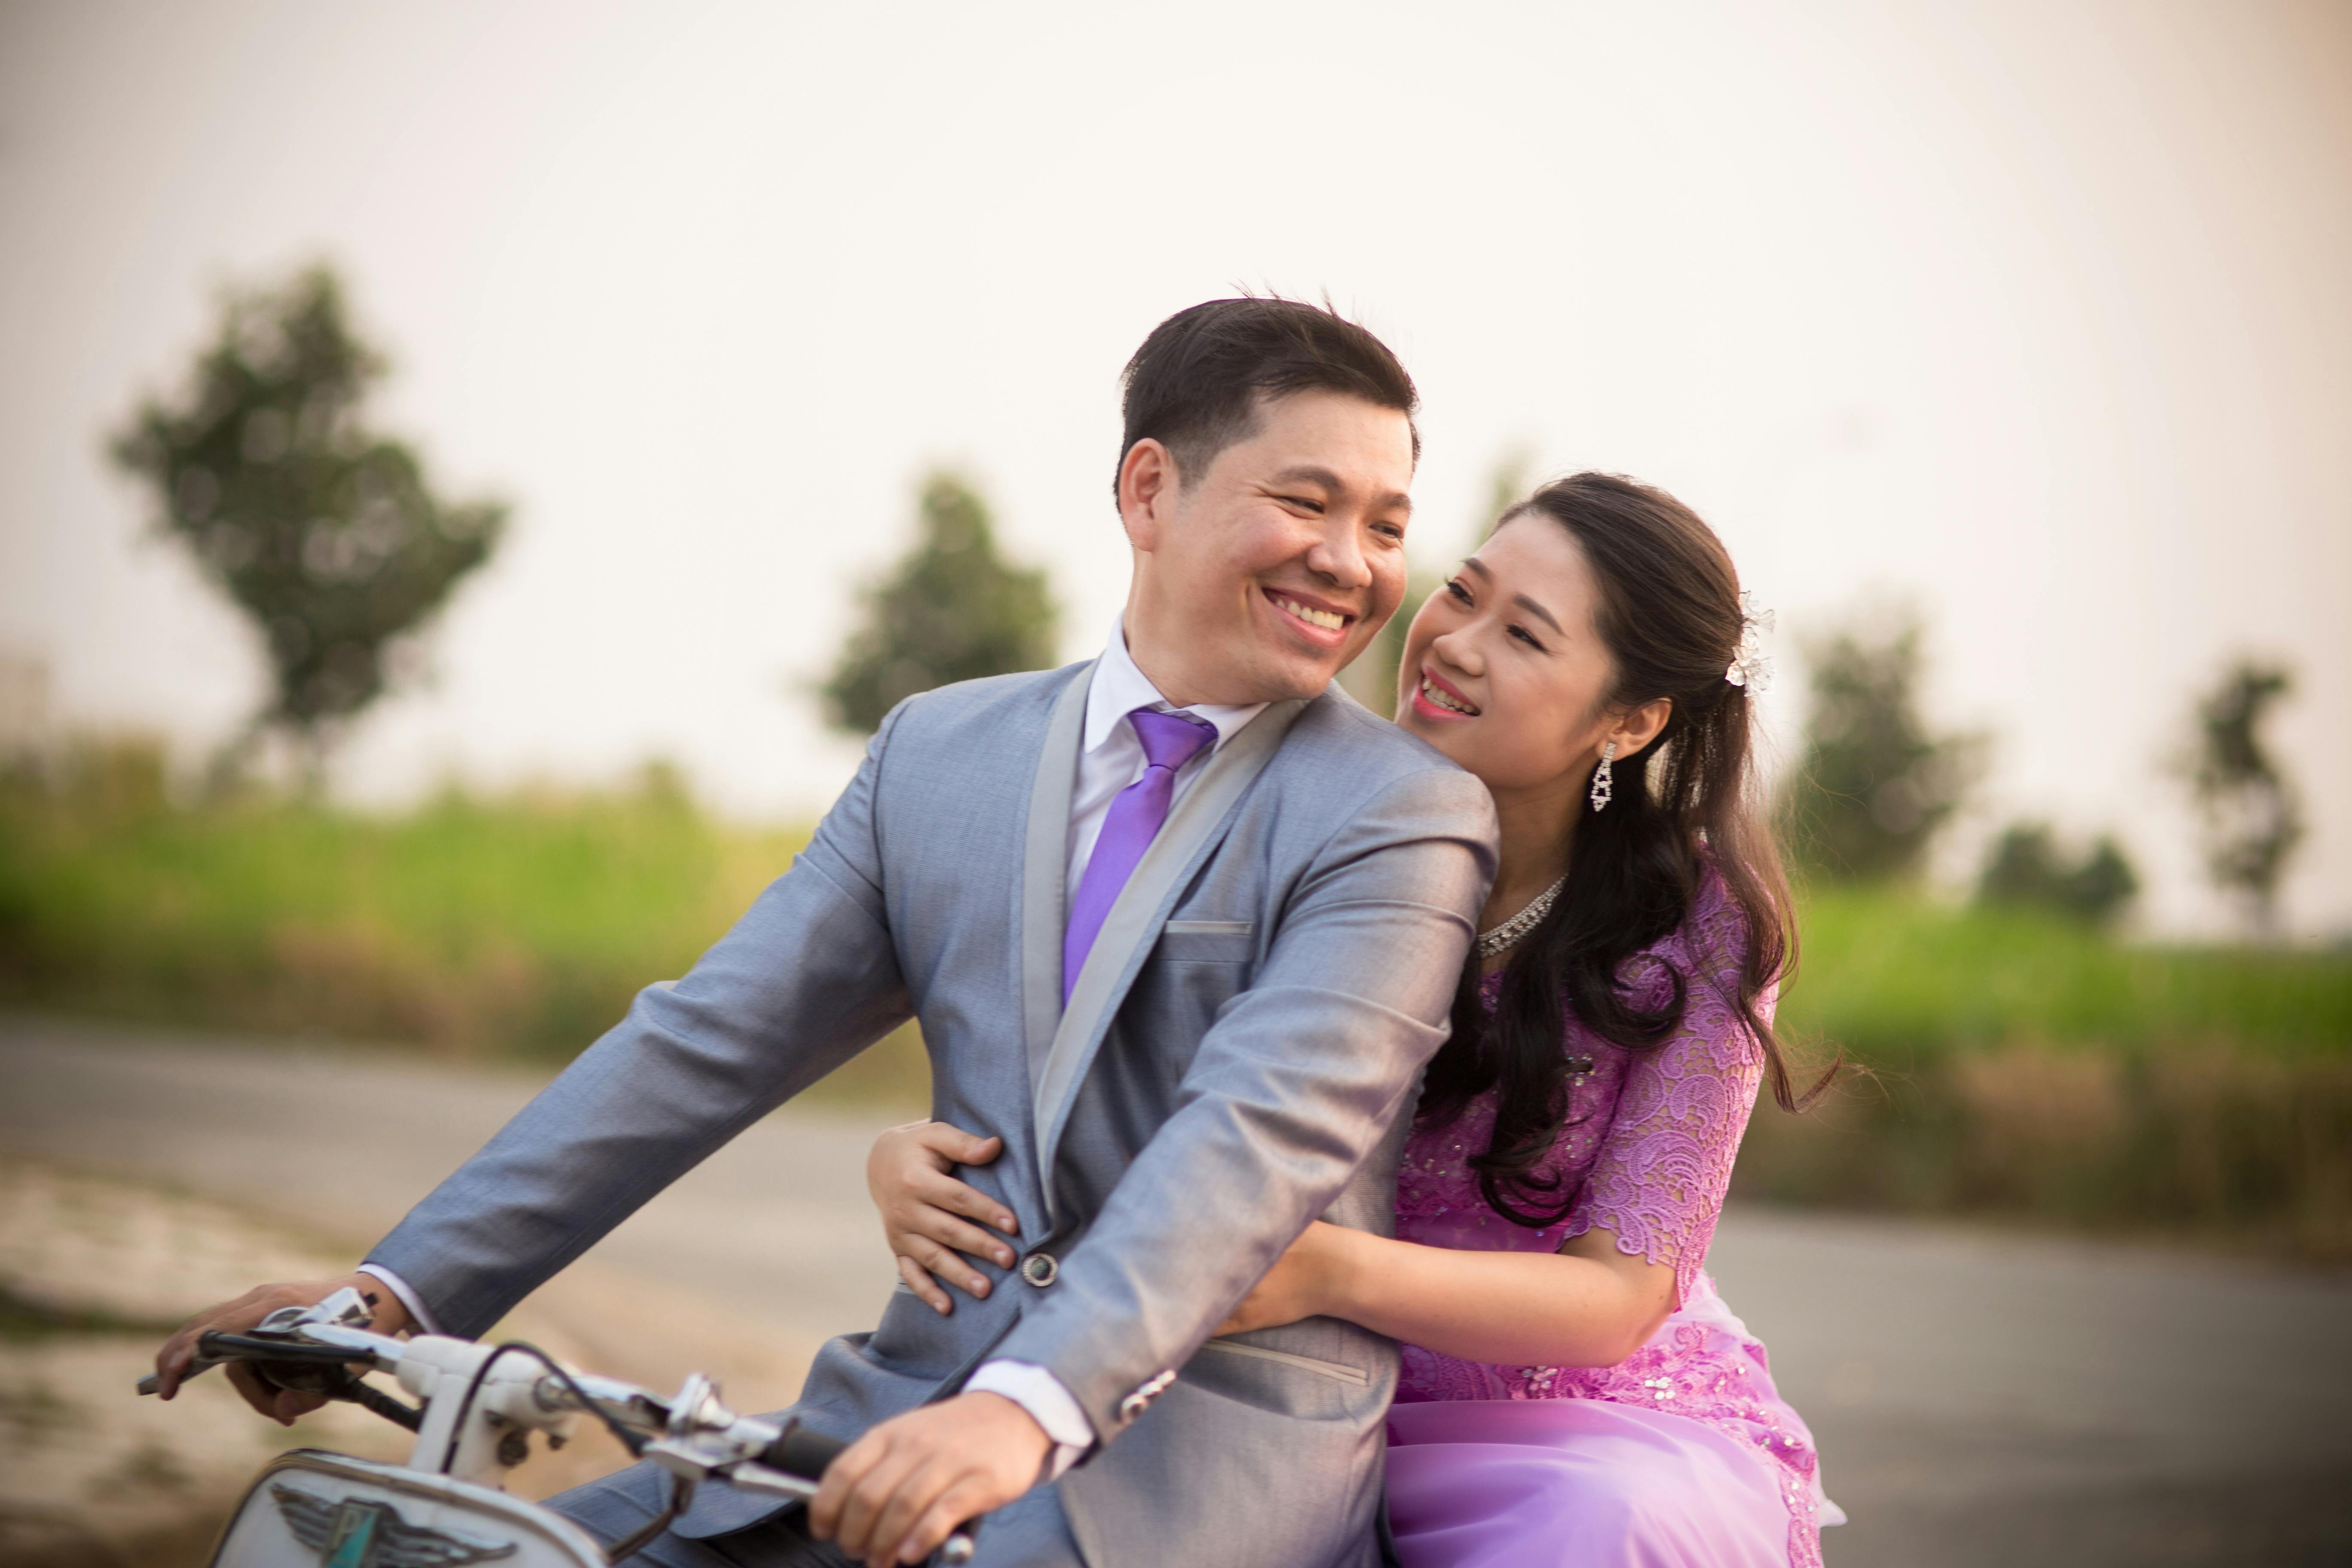 Stylish young couple pose on a bike | Chris Willis | Flickr